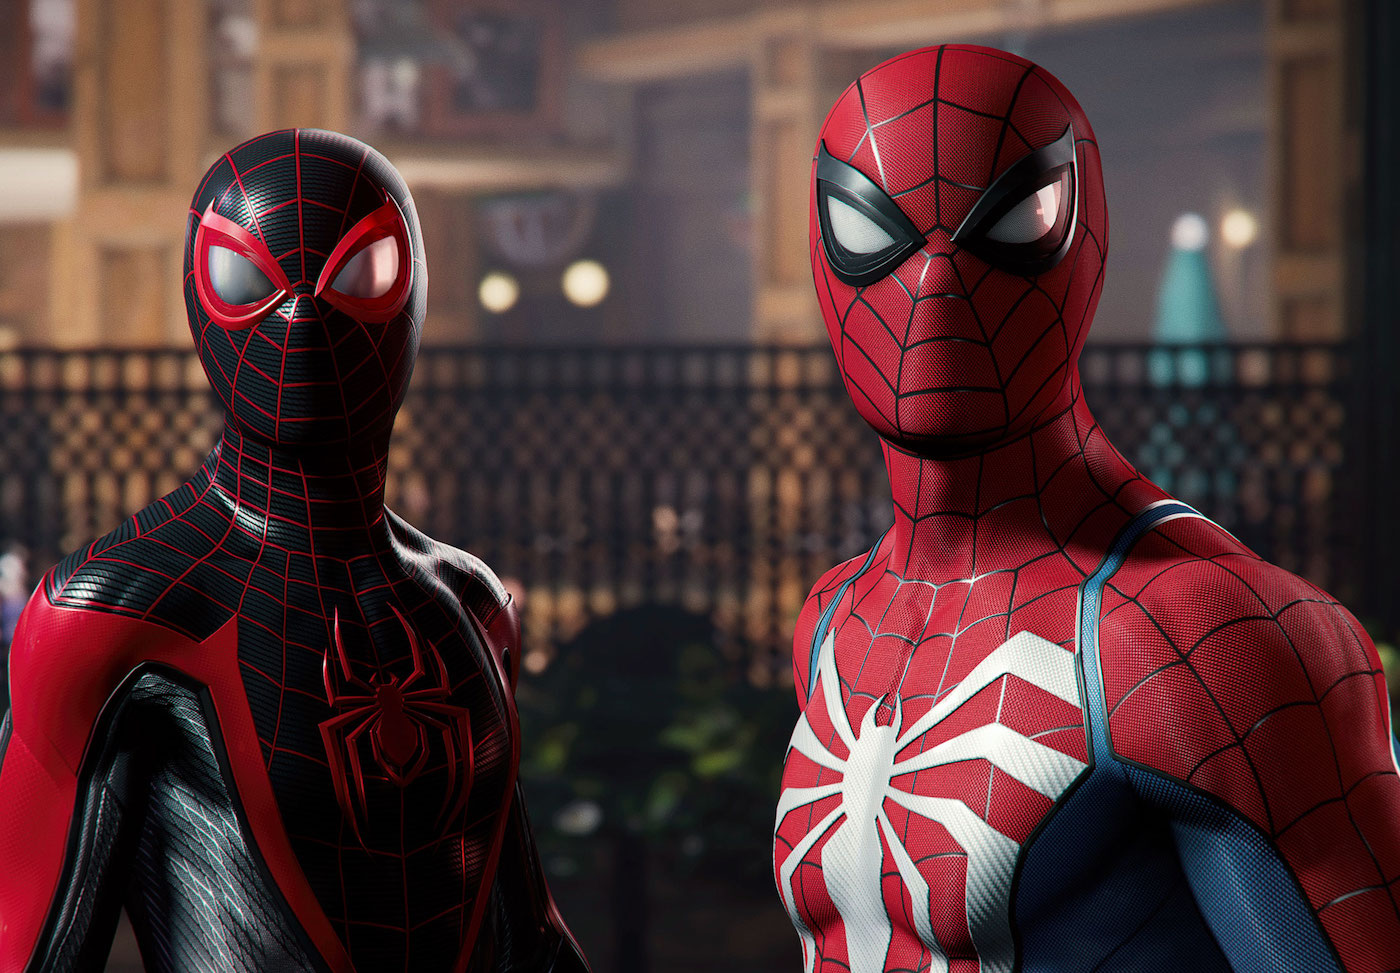 Marvel’s Spider-Man 2 has a PS5 release date!